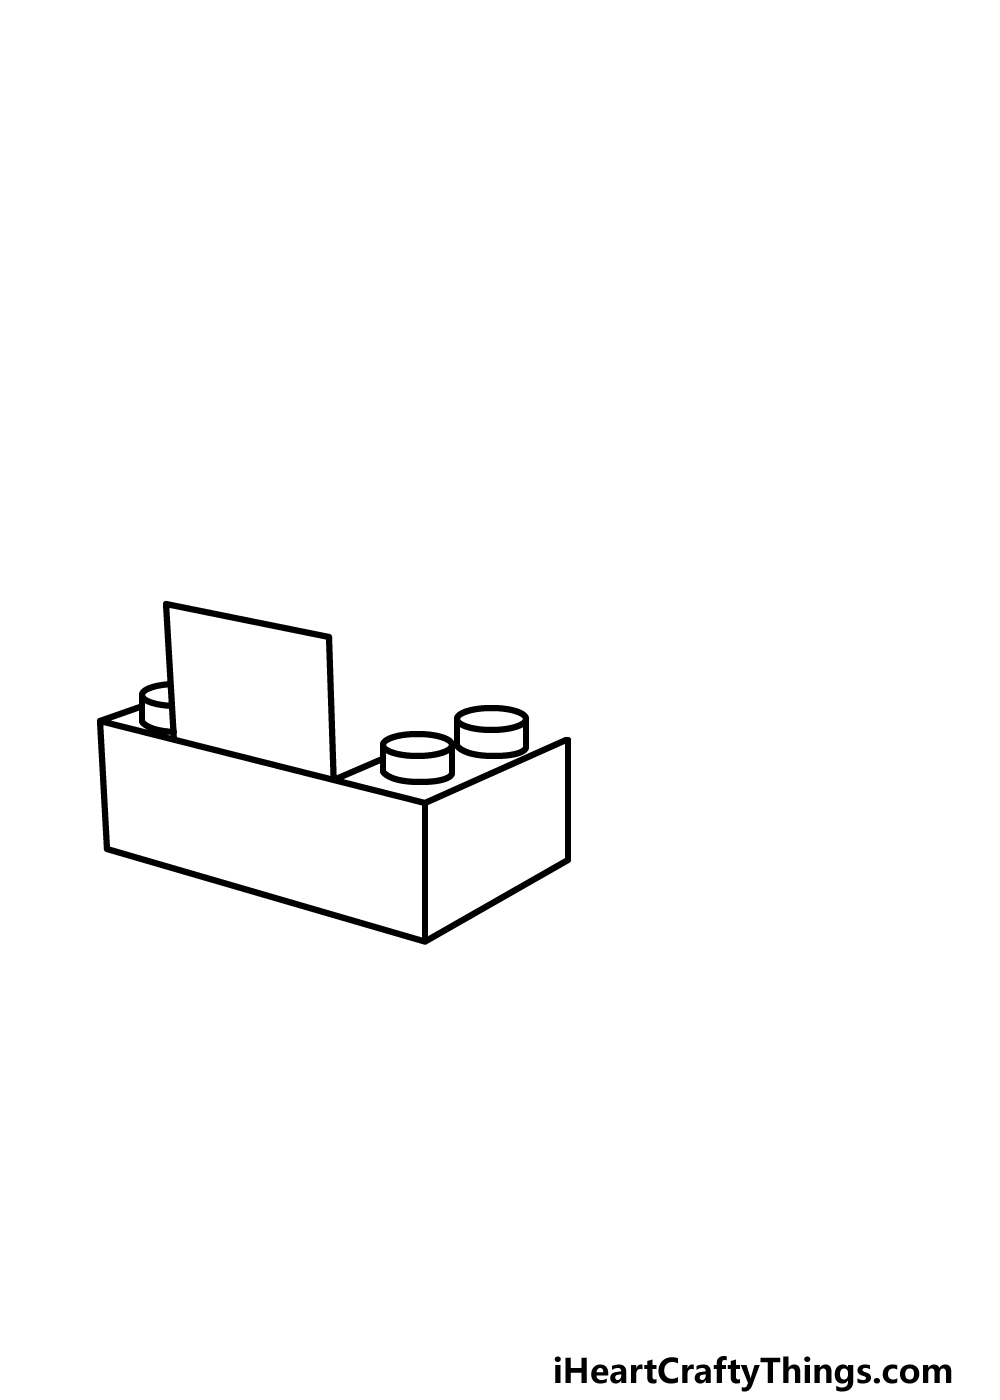 how to draw Lego step 2